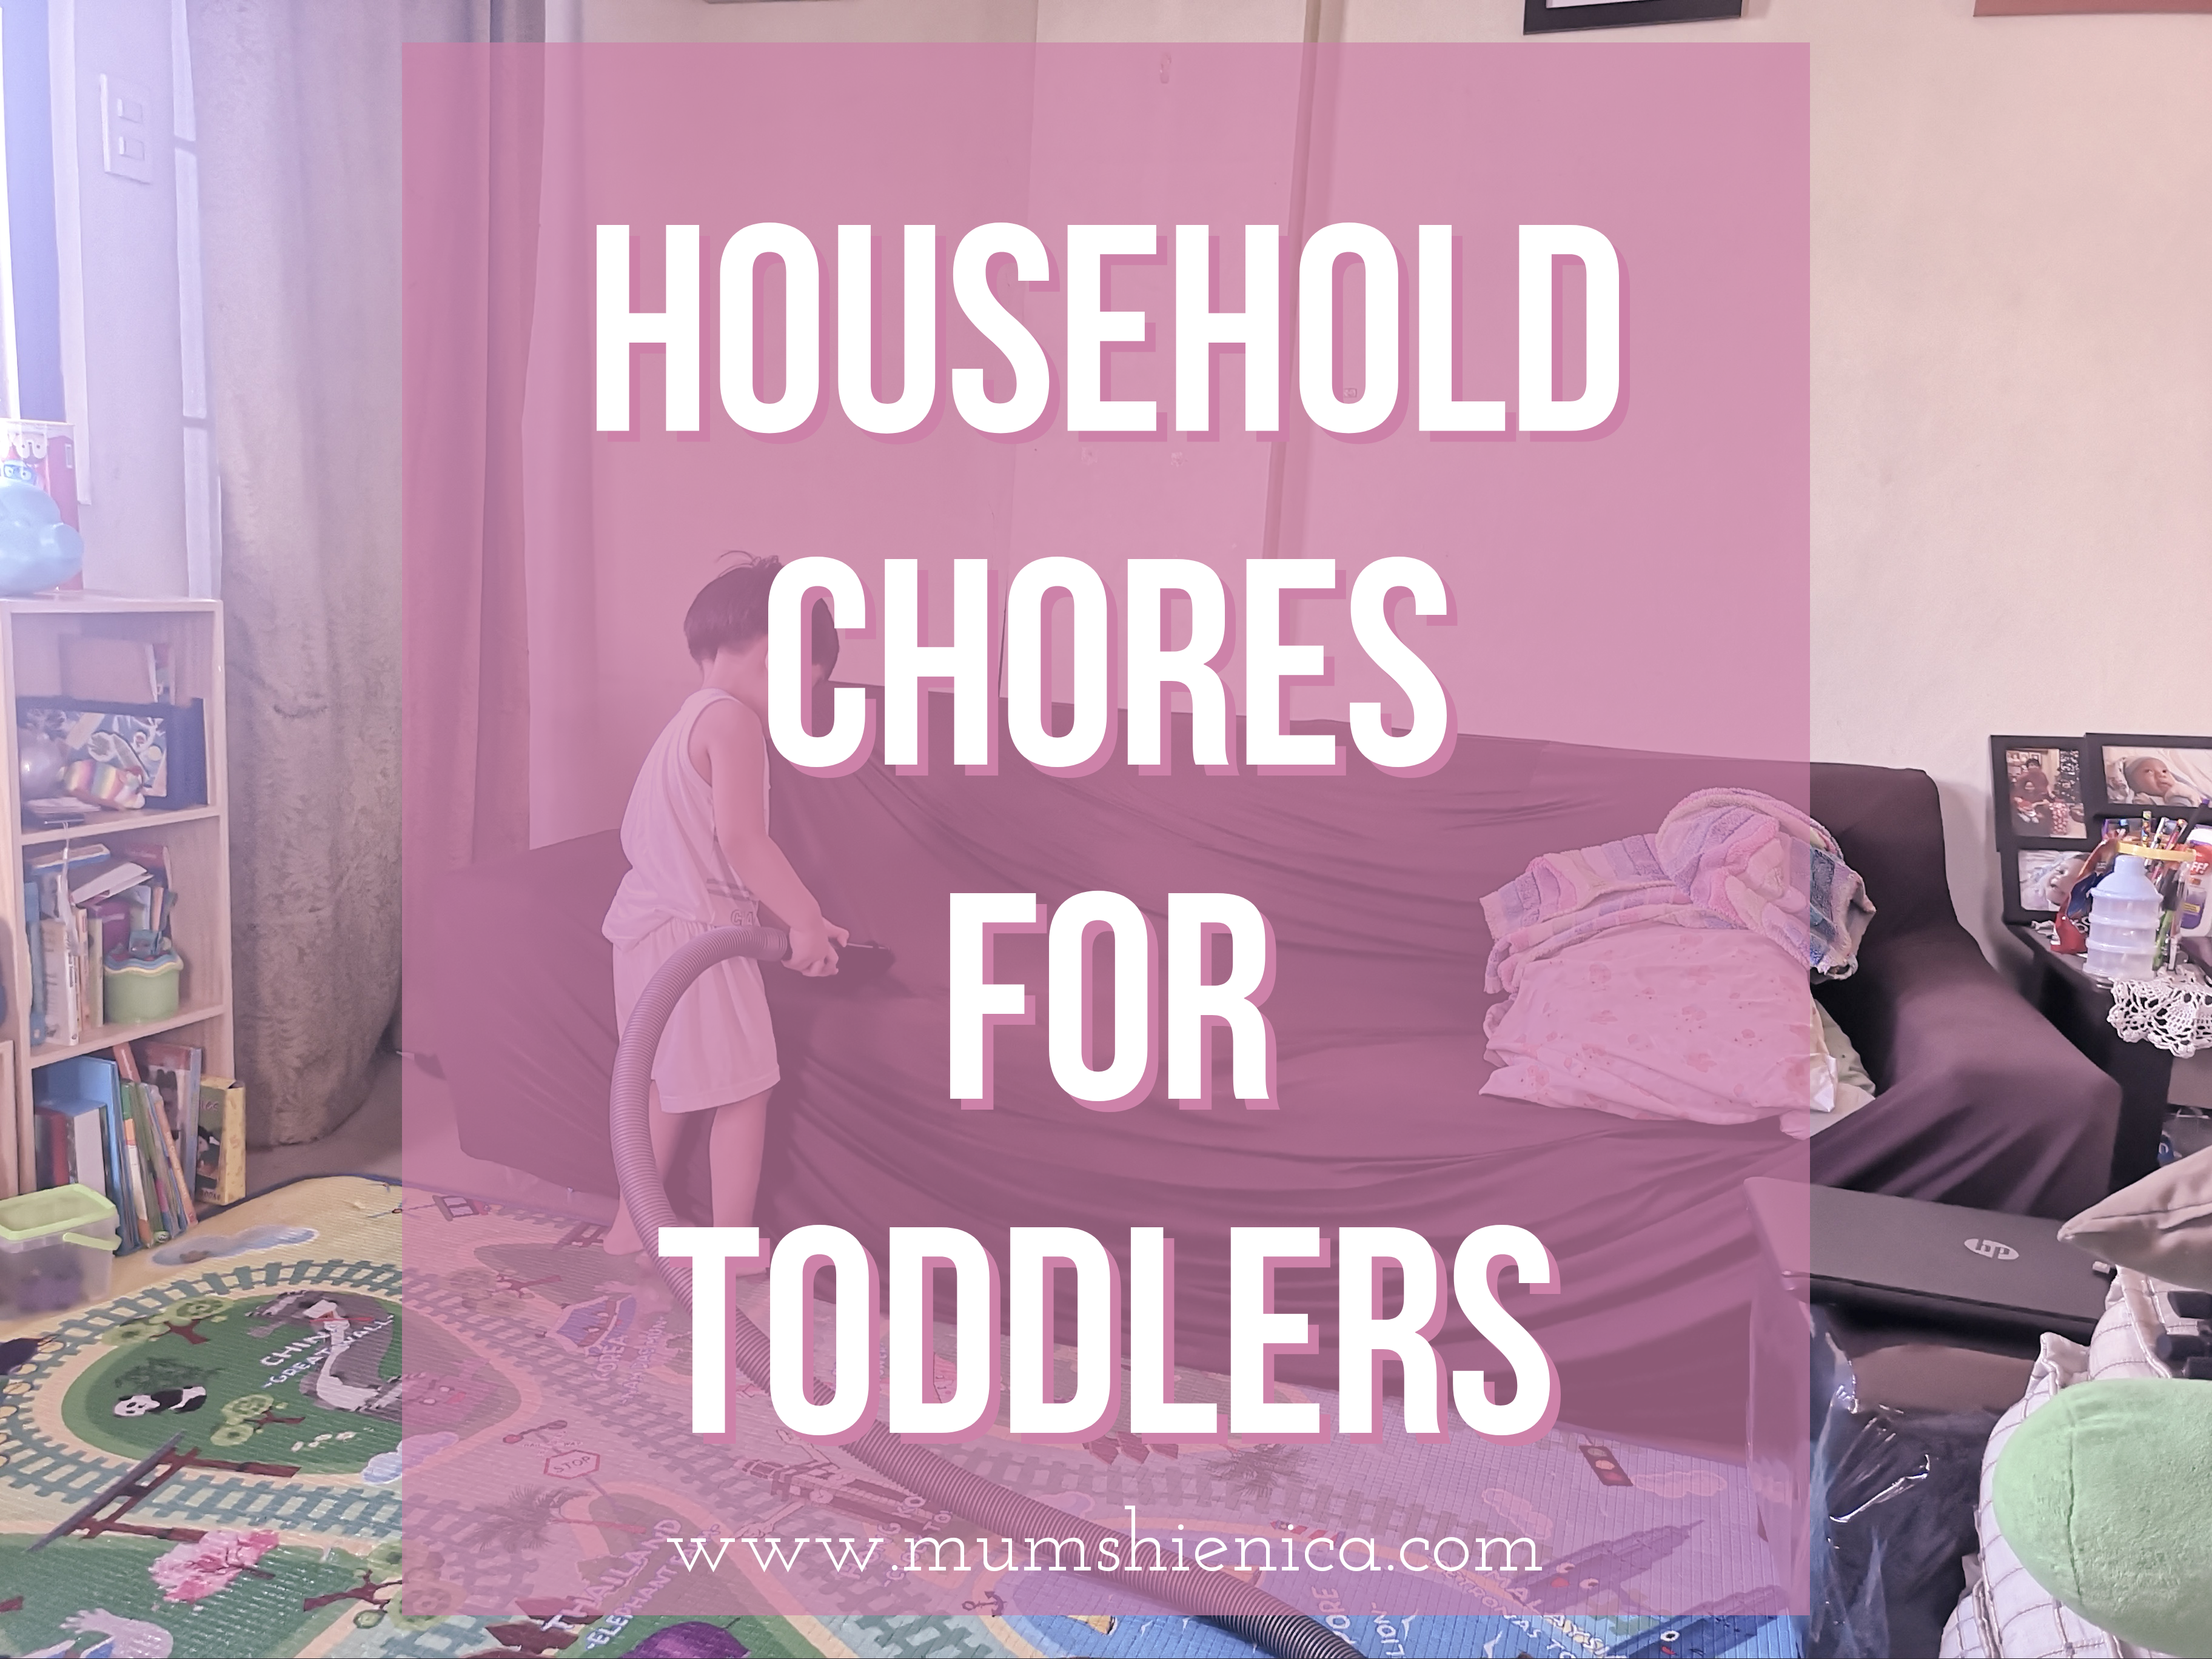 Household chores for toddlers